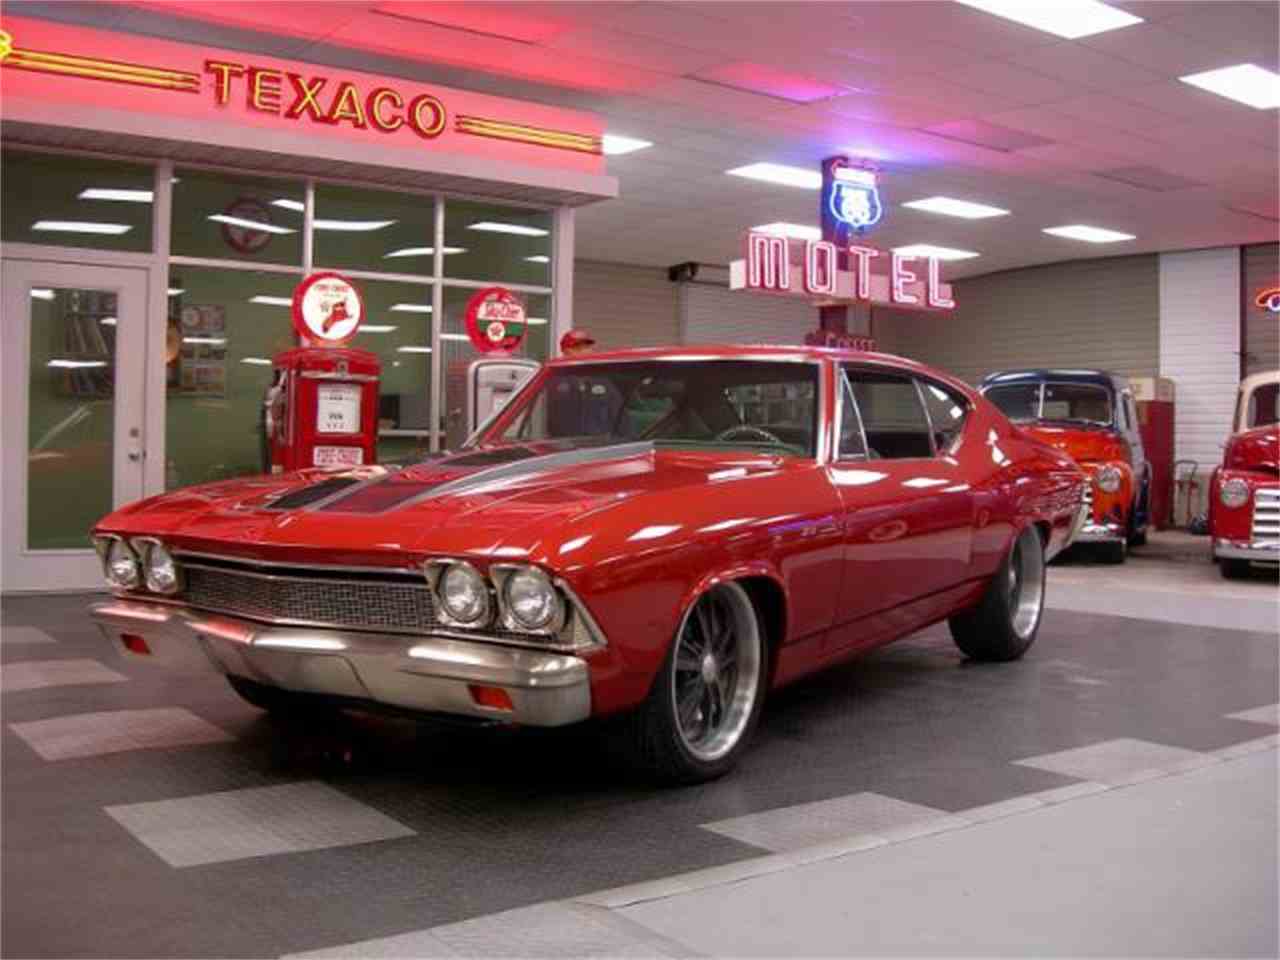 Amazing Chevrolet Chevelle Pictures & Backgrounds